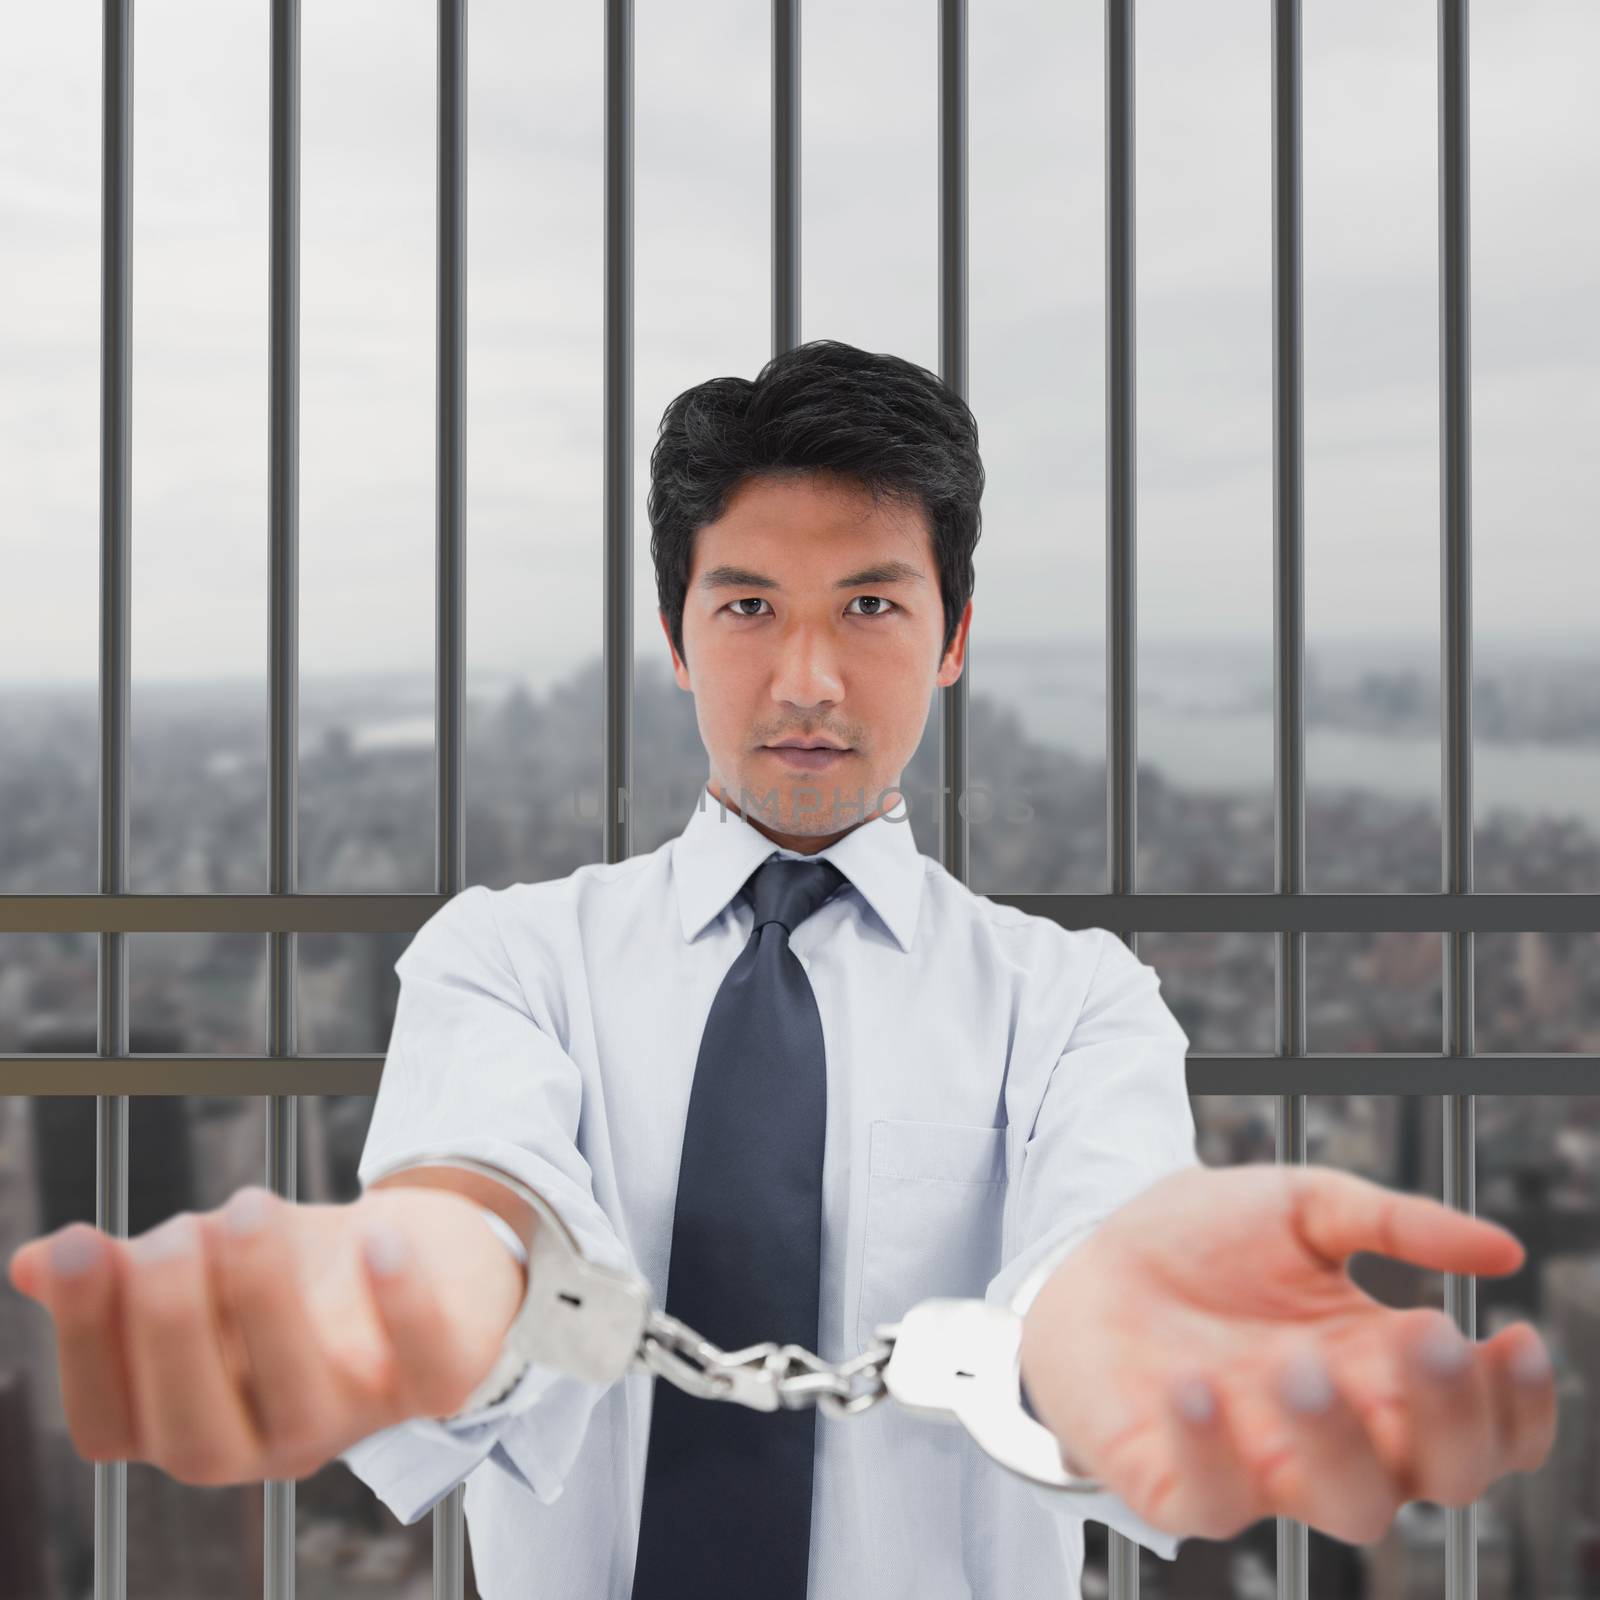 Composite image of businessman with handcuffs by Wavebreakmedia